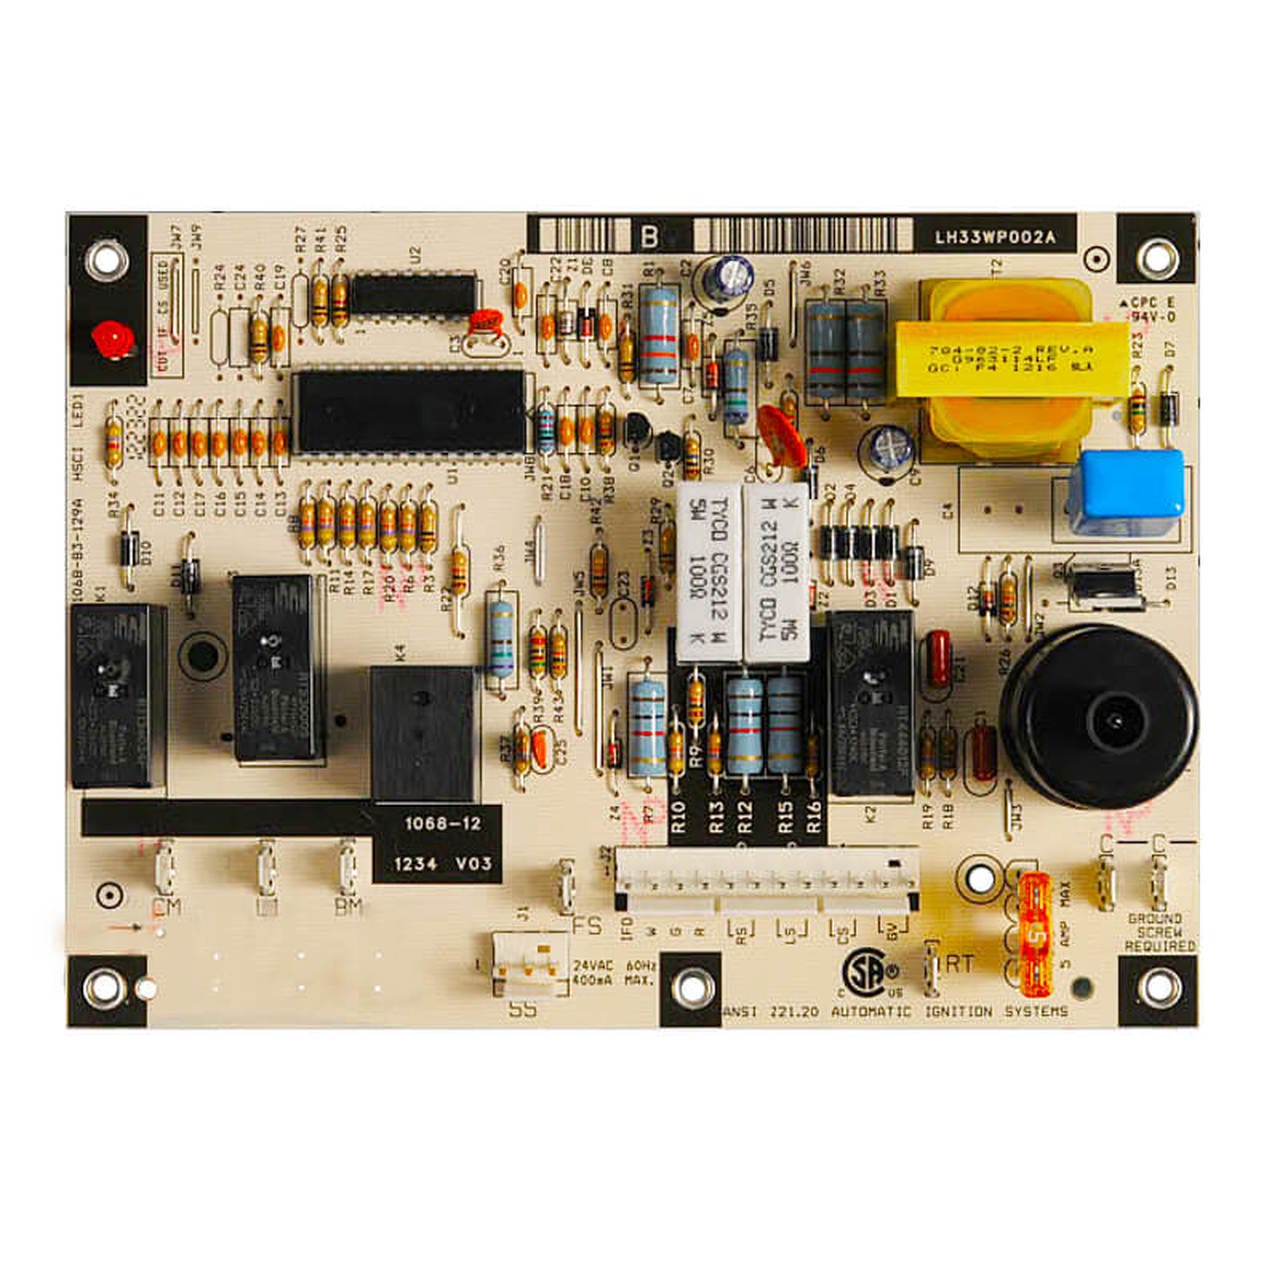 Carrier LH33WP002 Ignition Control Module Circuit Board for sale online 